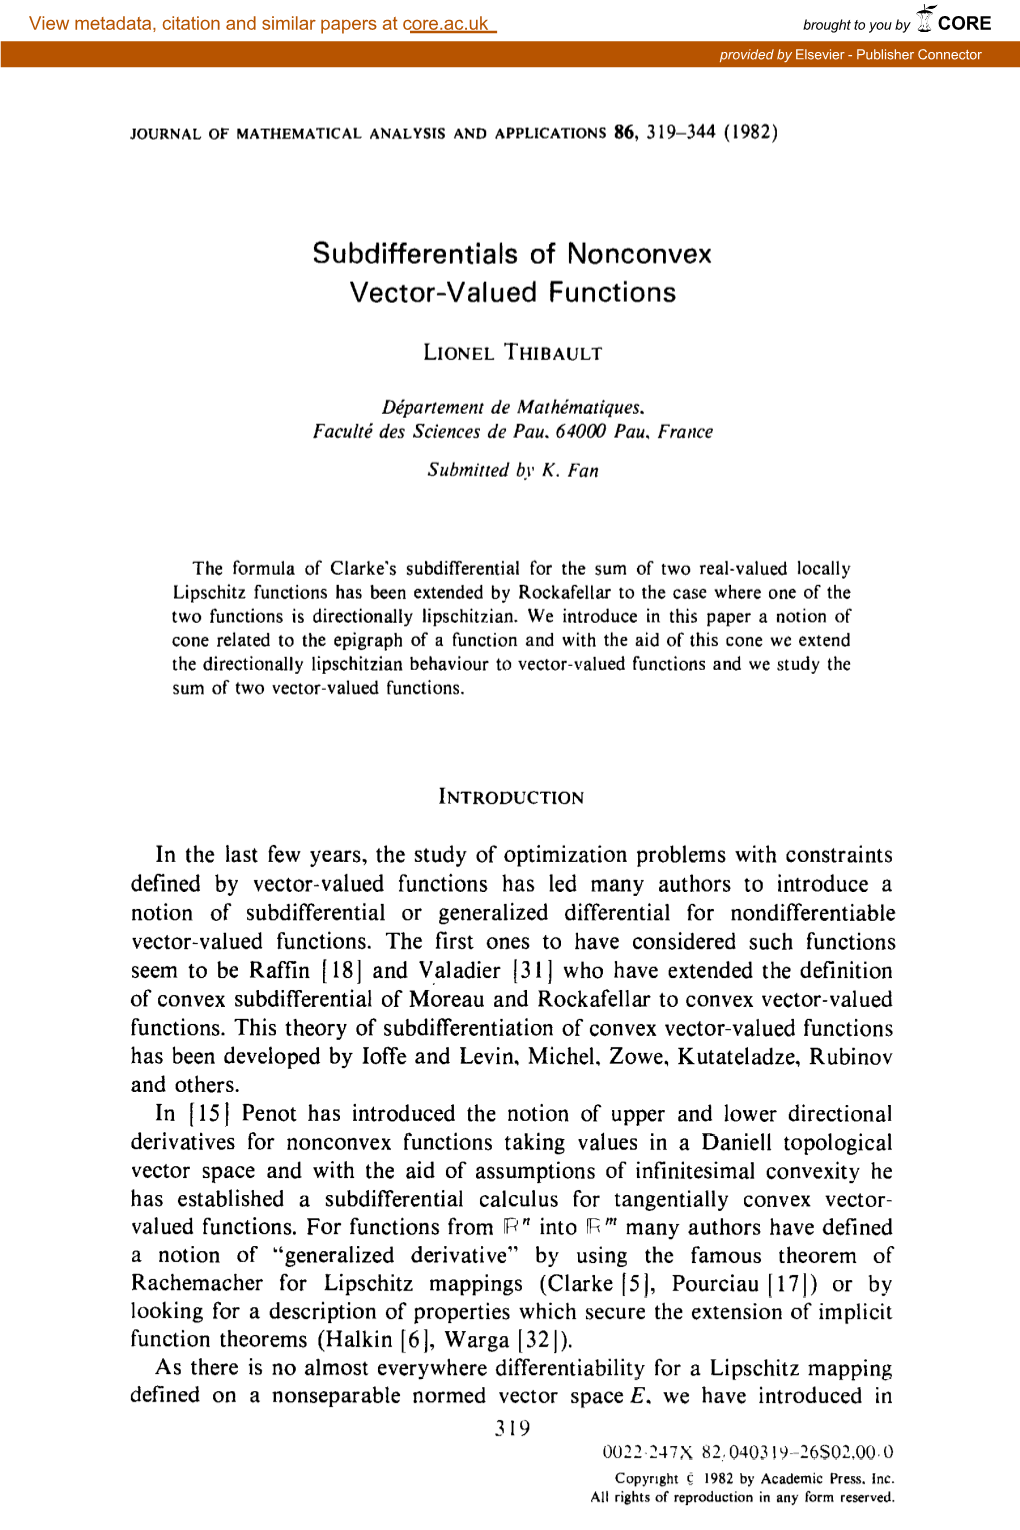 Subdifferentials of Nonconvex Vector-Valued Functions